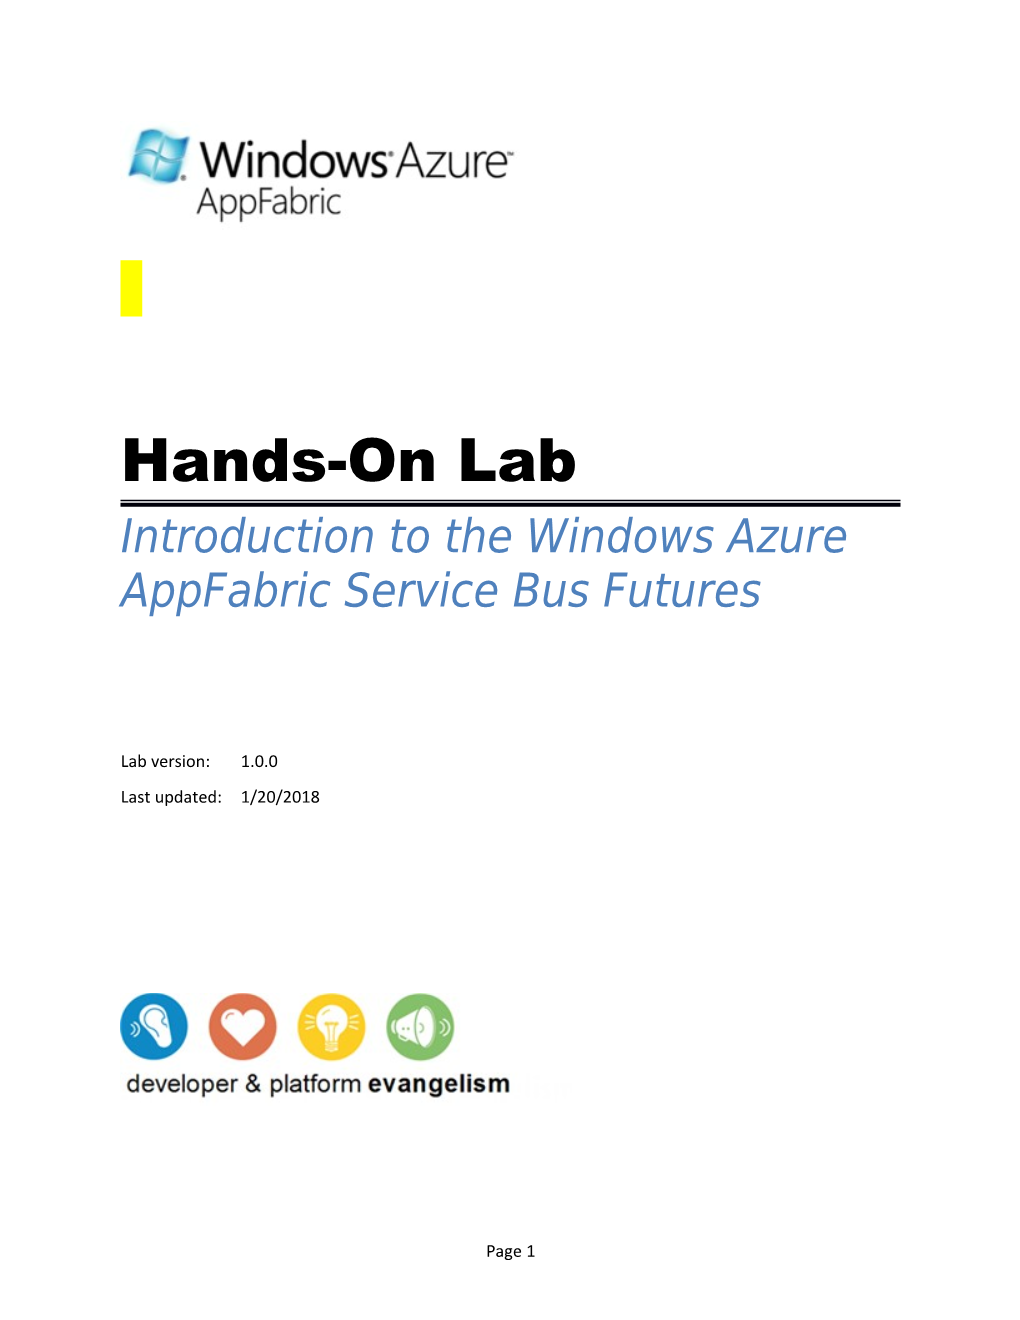 Introduction to the Windows Azure Appfabric Service Bus Futures